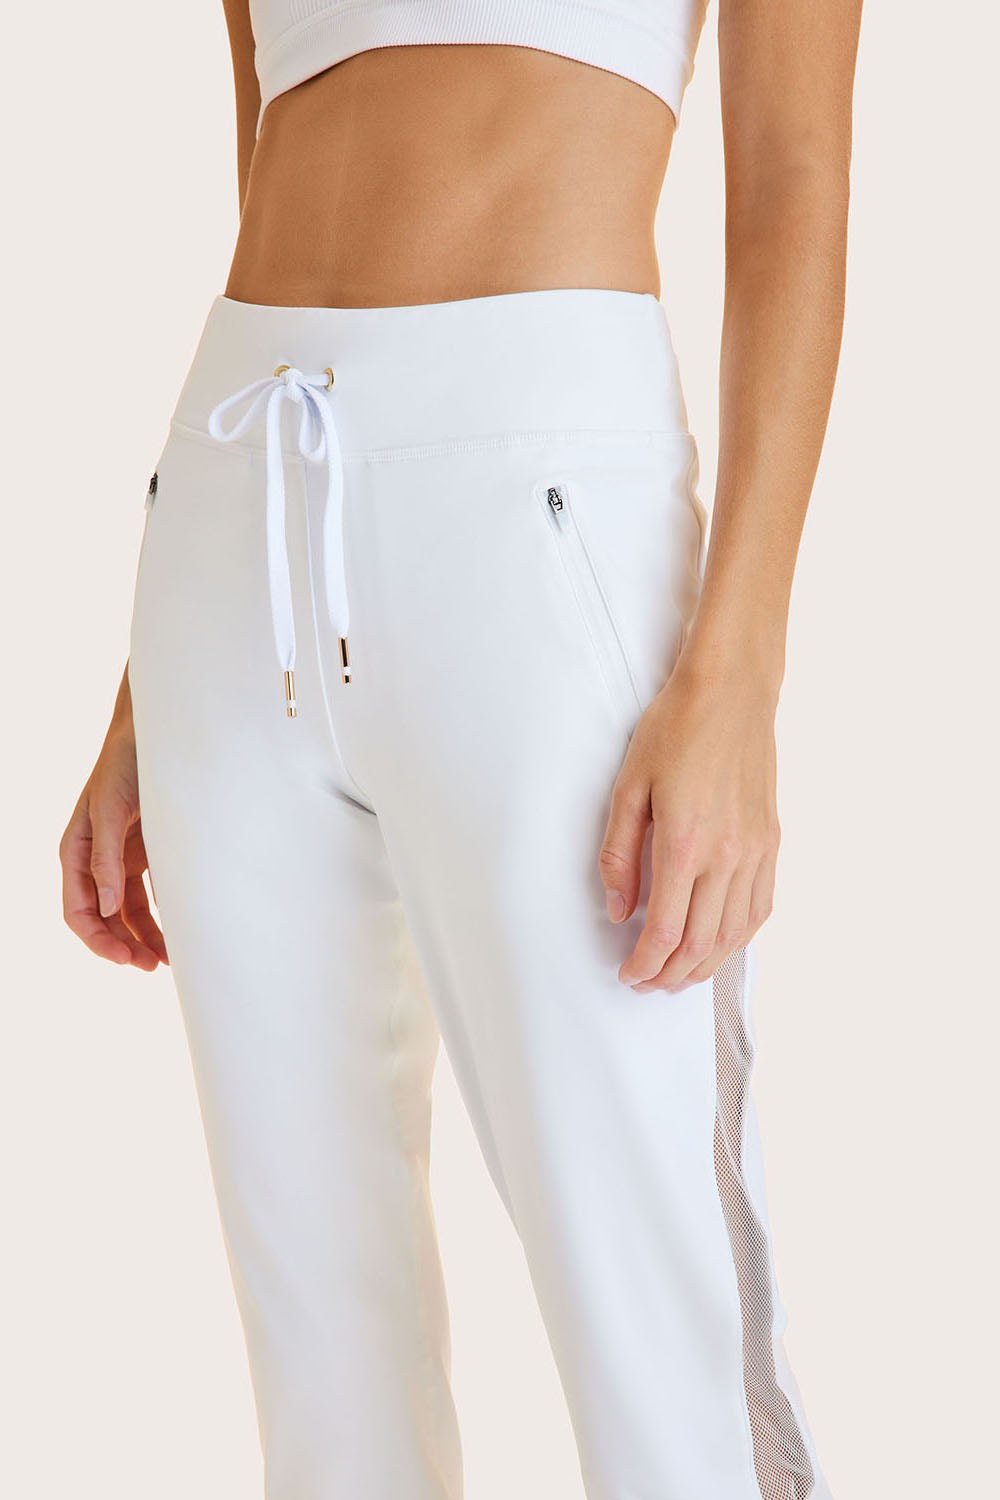 Alala women's active pant in white